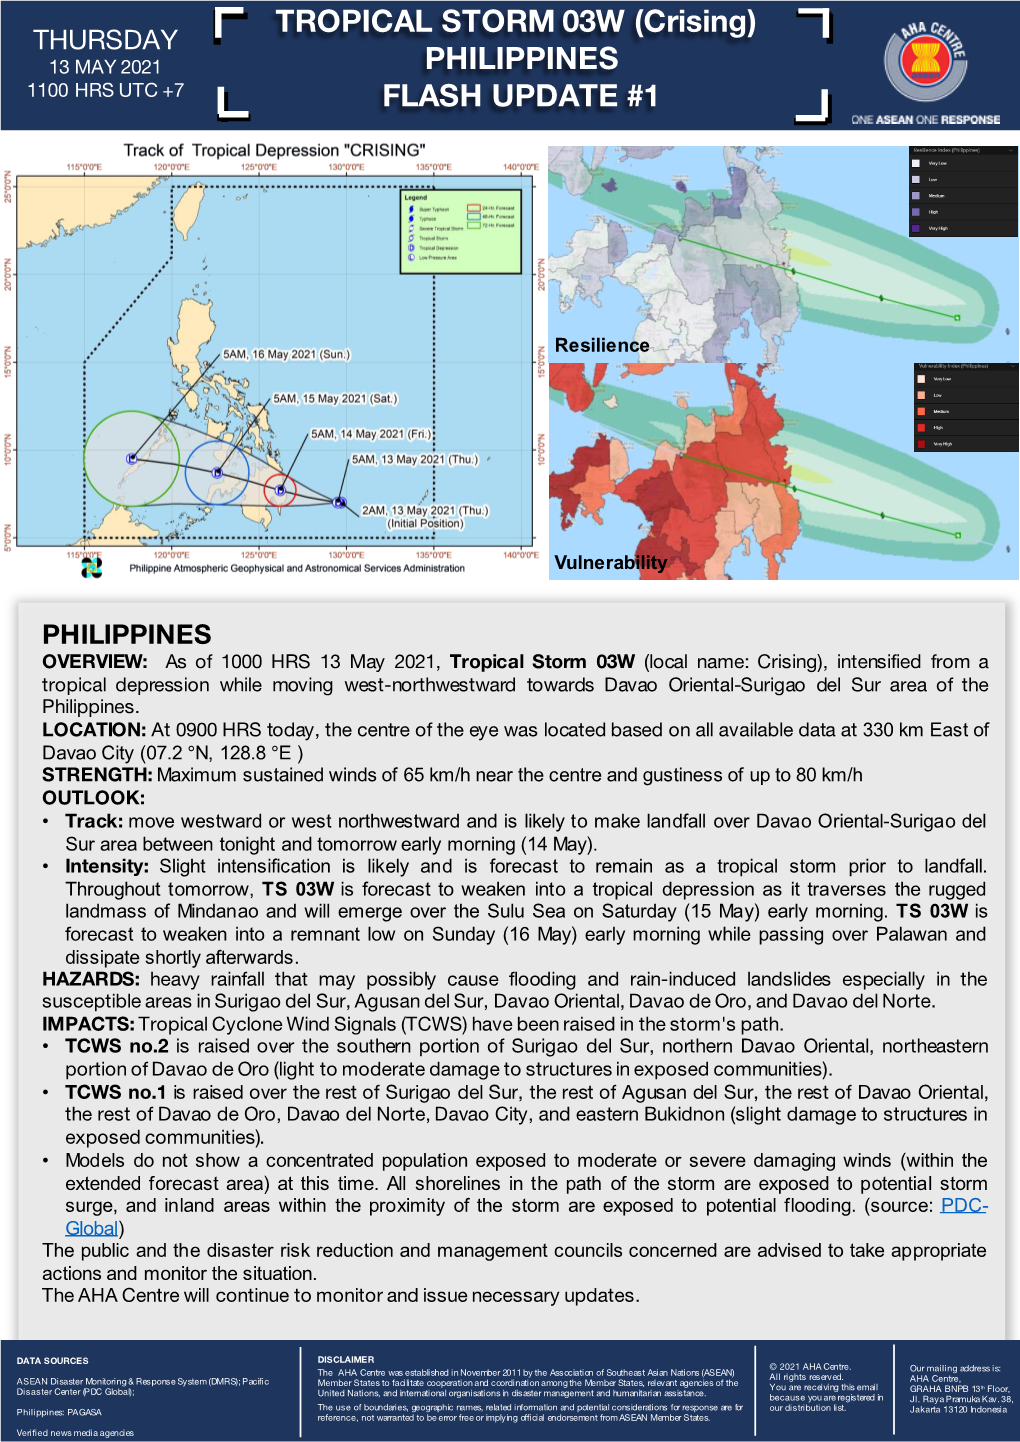 TROPICAL STORM 03W (Crising) PHILIPPINES FLASH UPDATE #1